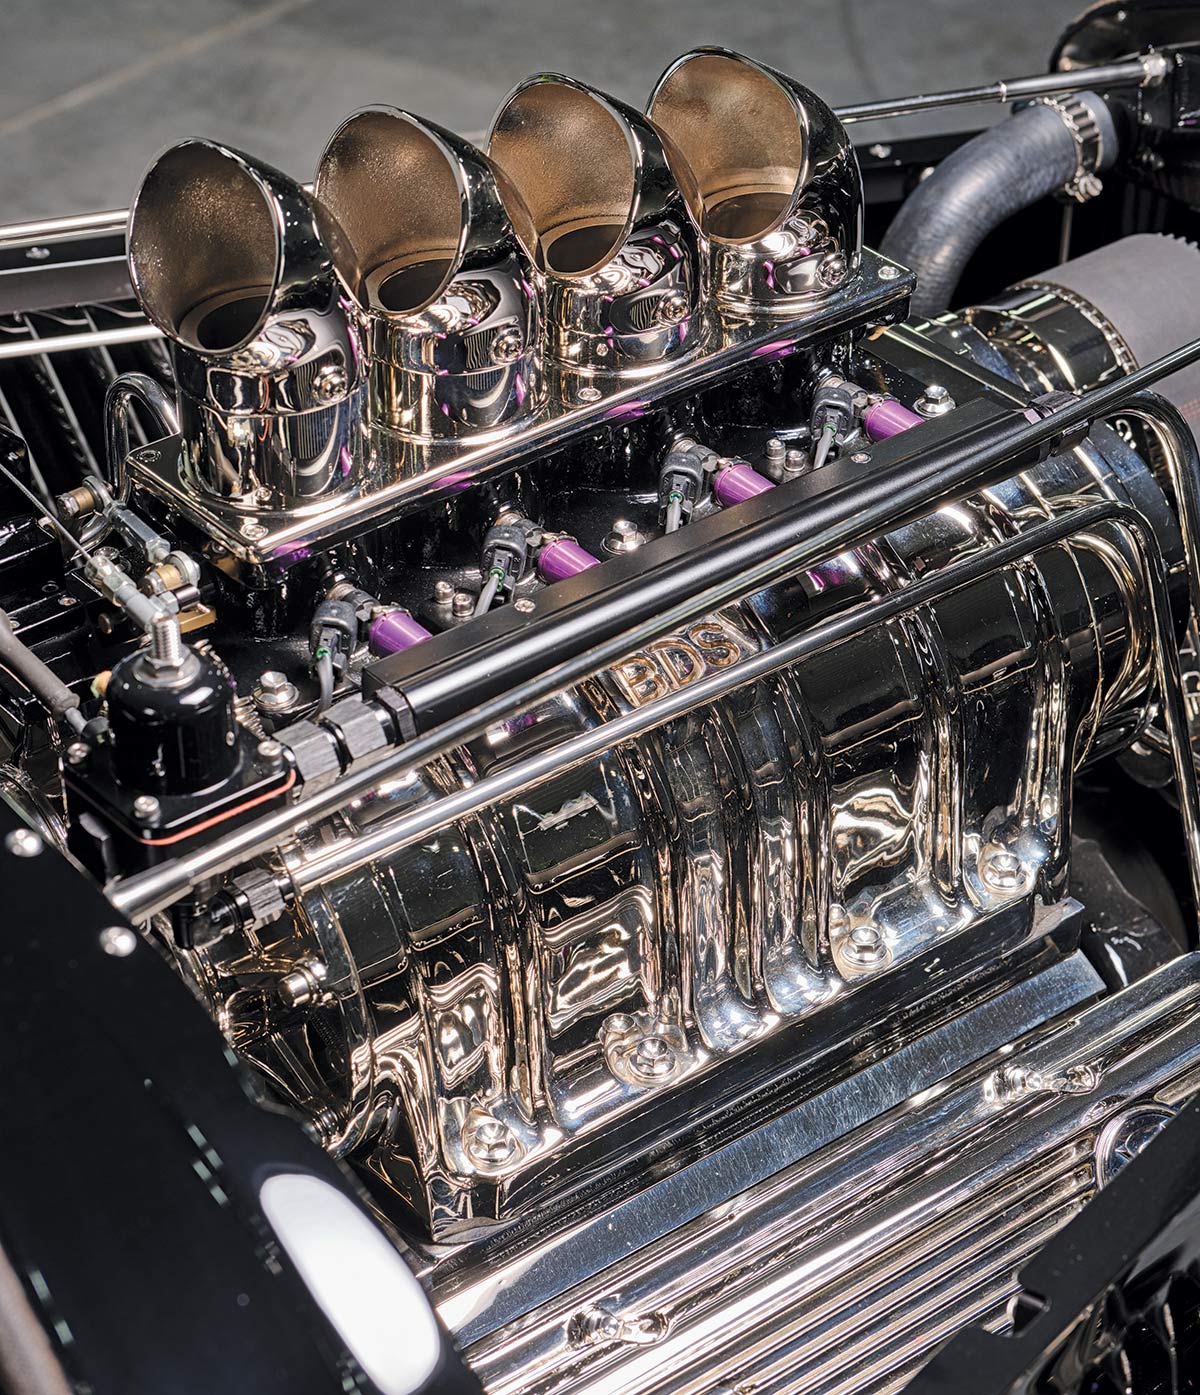 '34 Ford Coupe engine closeup